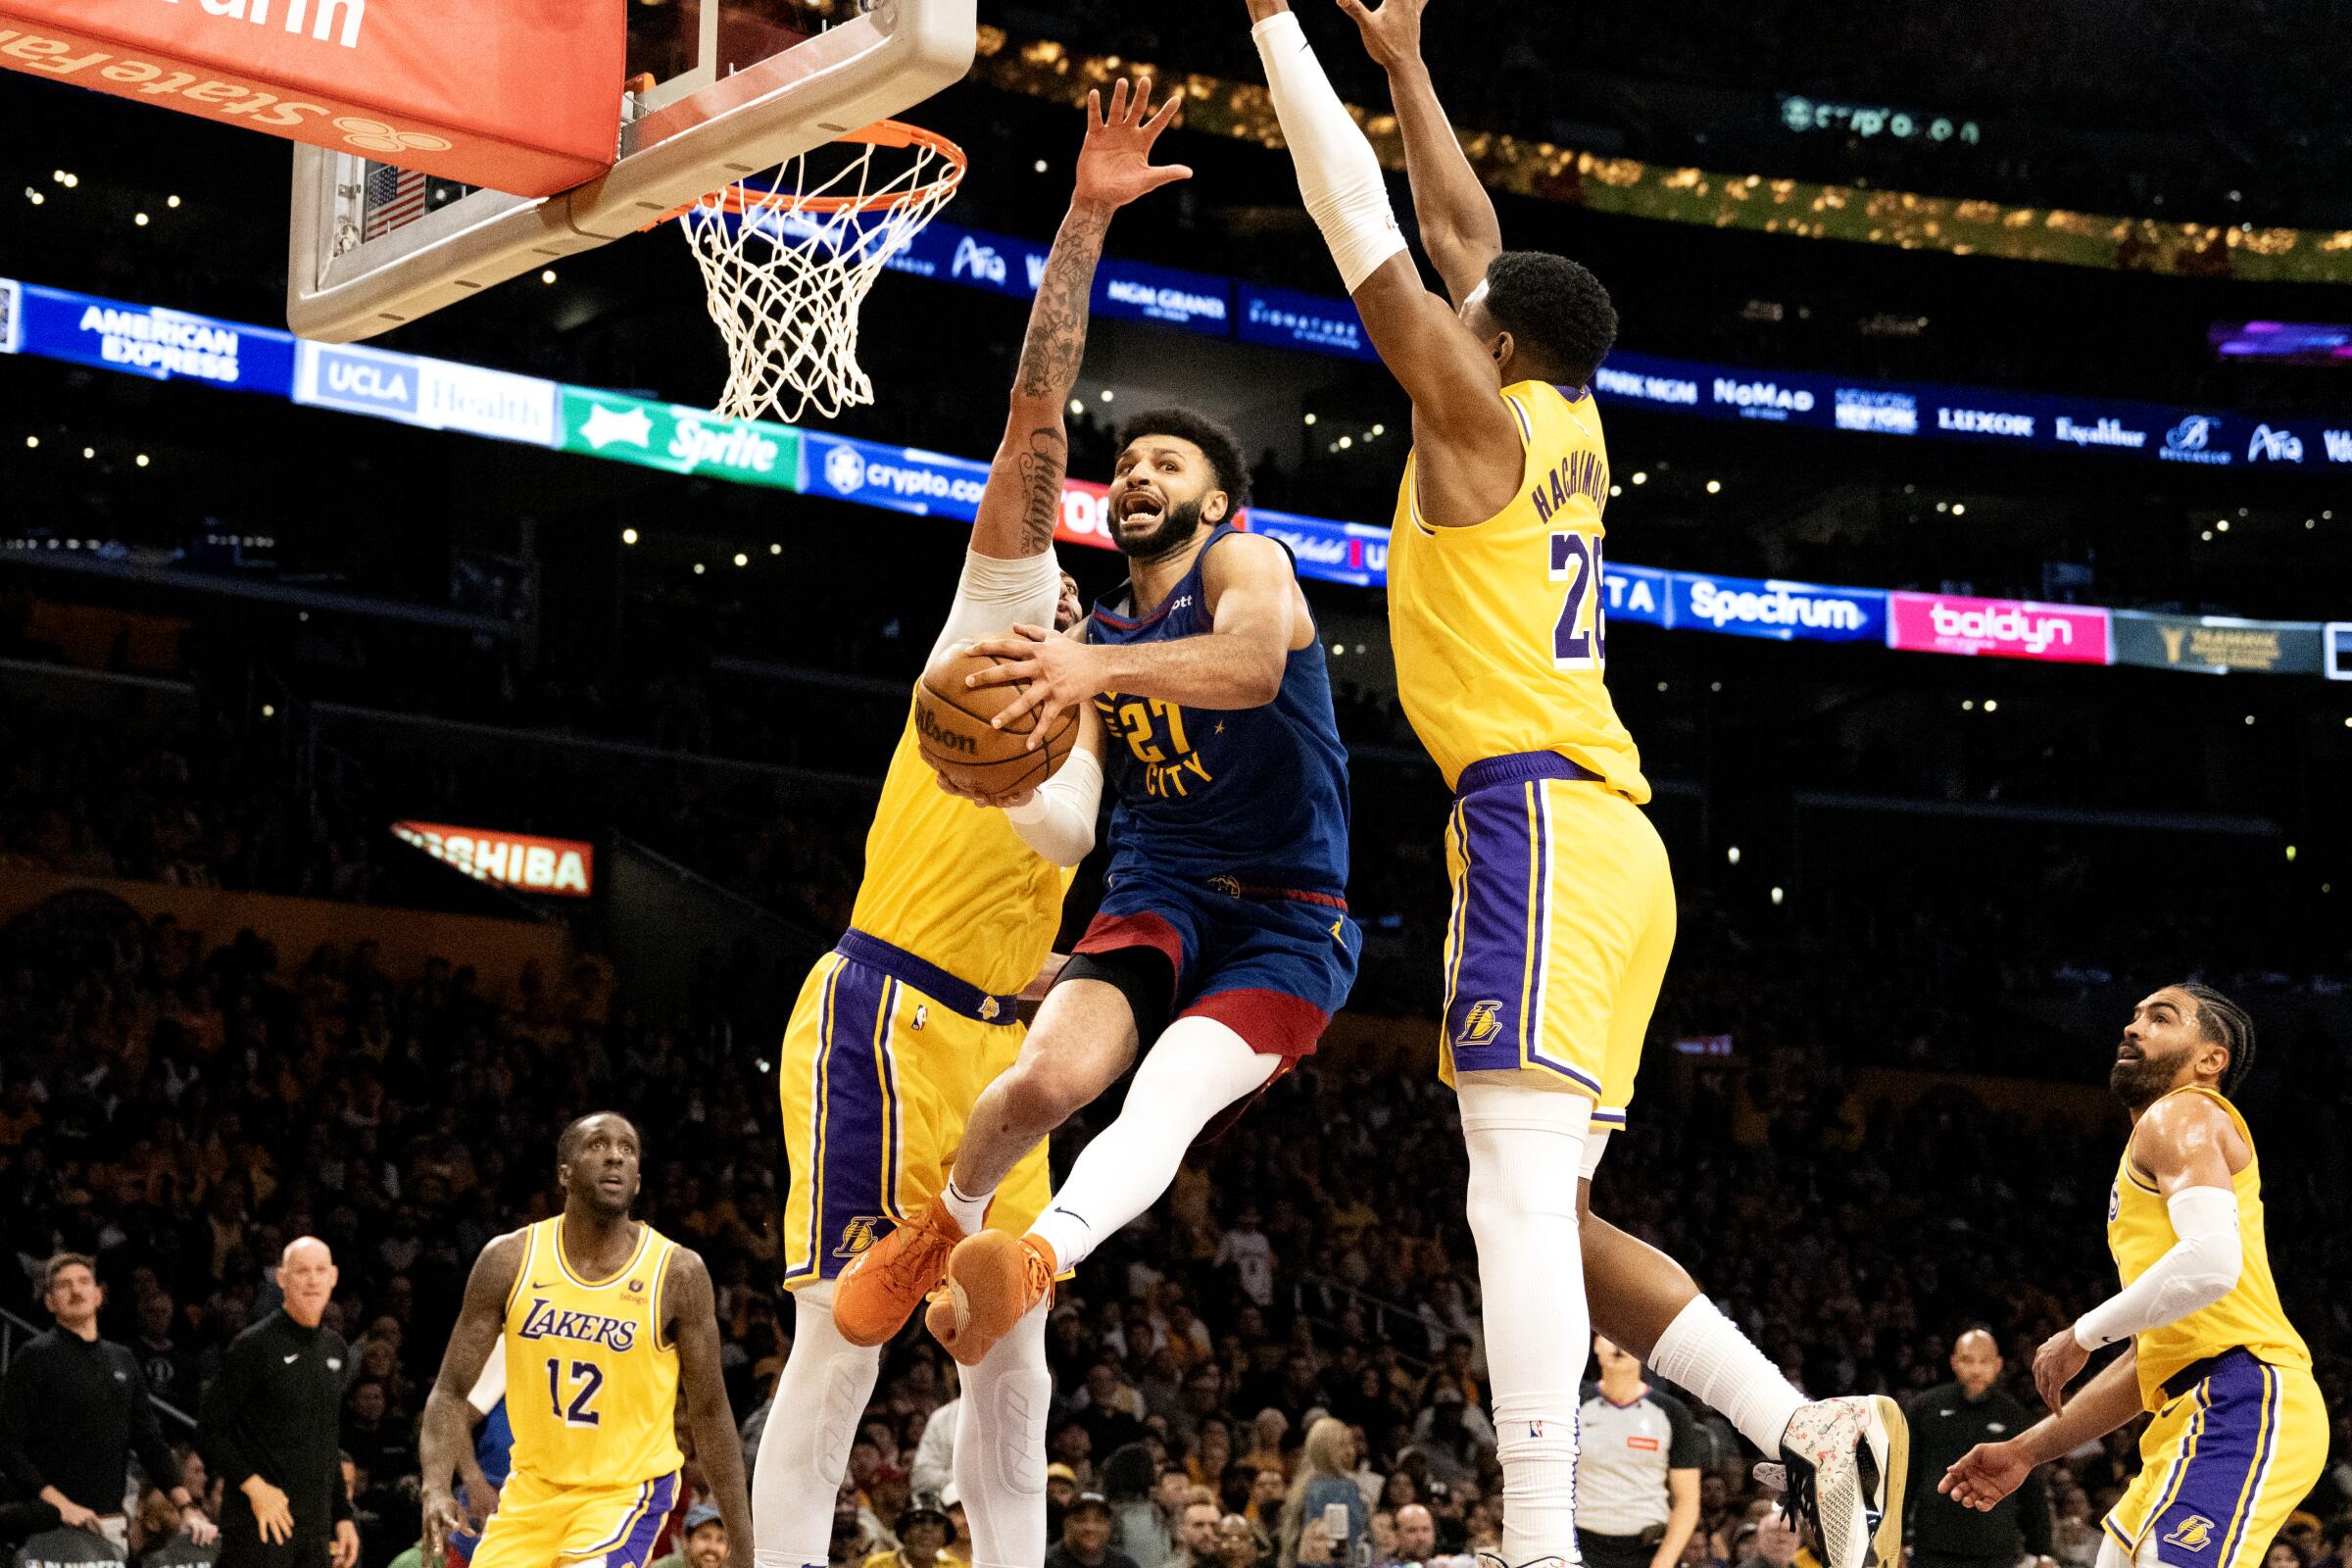 Nuggets guard Jamal Murray splits the defense of Lakers forwards Anthony Davis, left, and Rui Hachimura on a layup attempt.